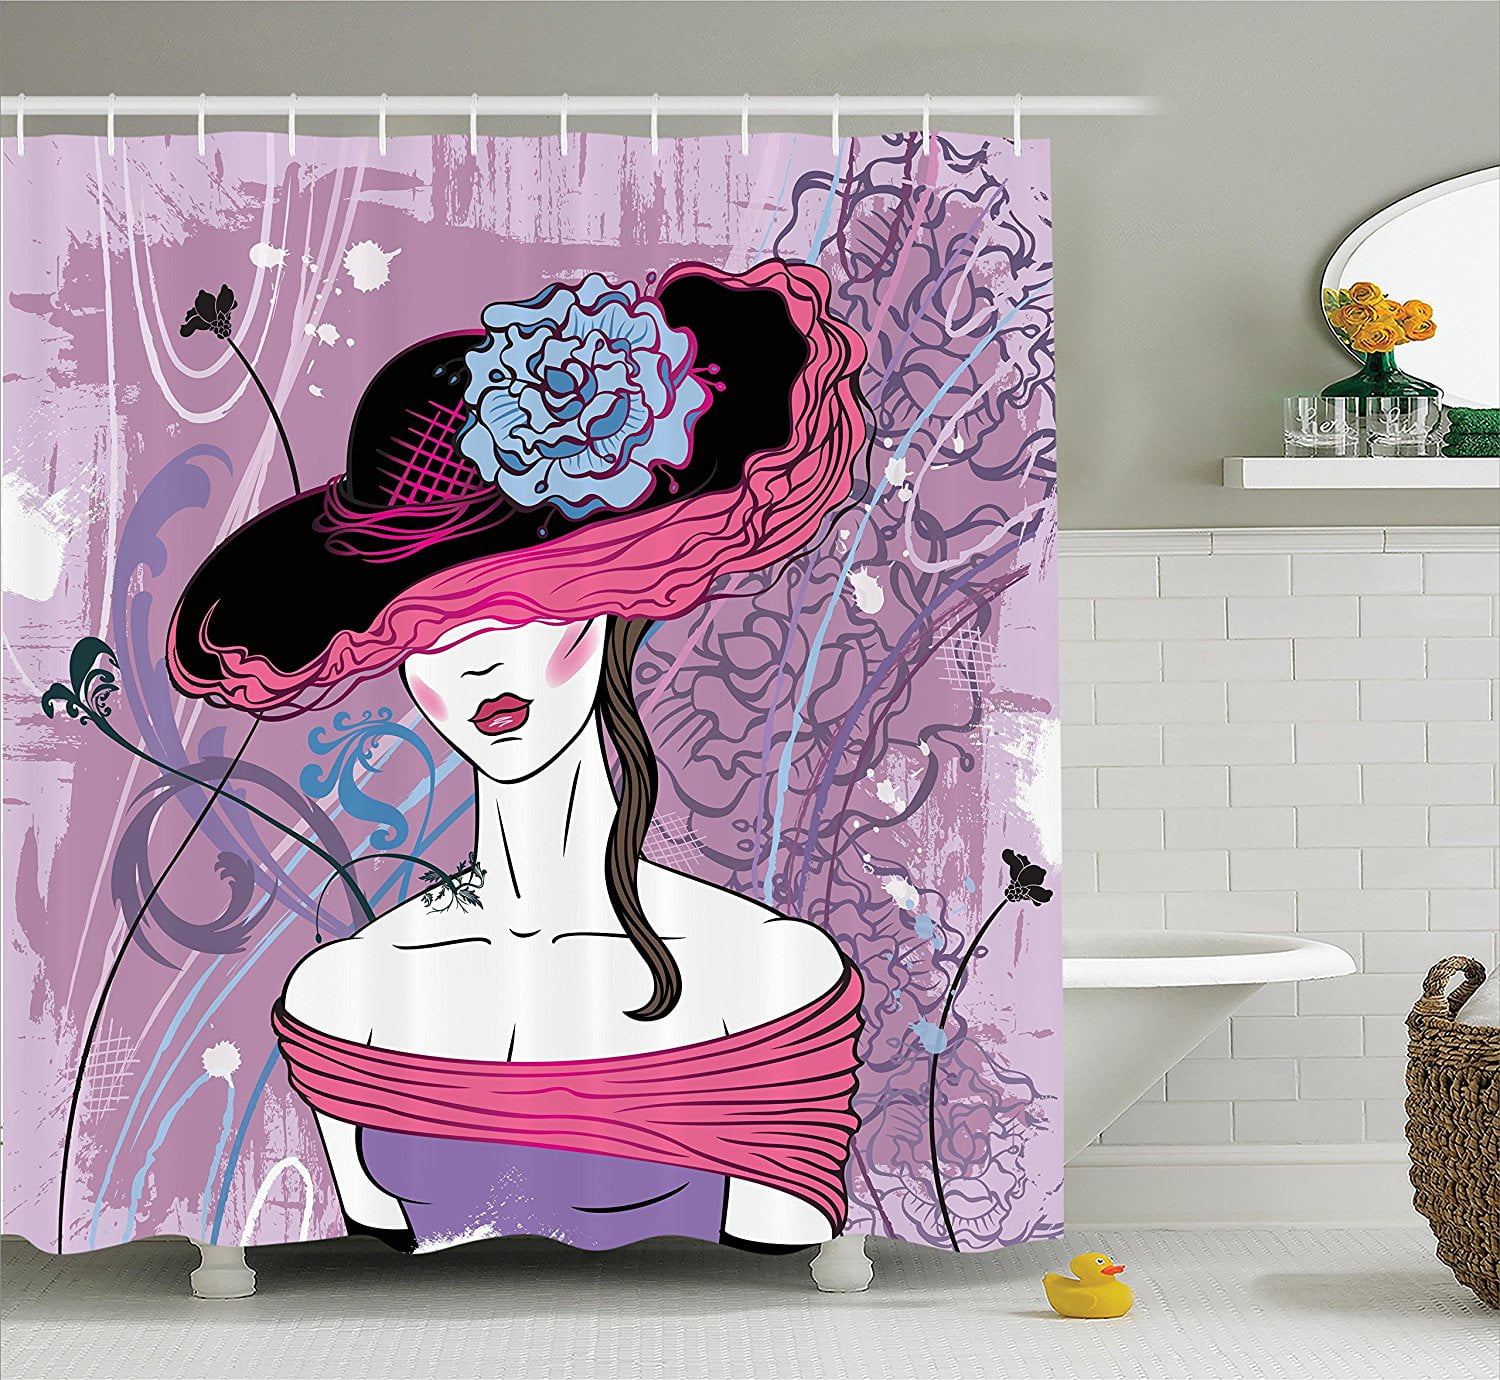 Details about   Fantasy Shower Curtain Medieval Figure Print for Bathroom 